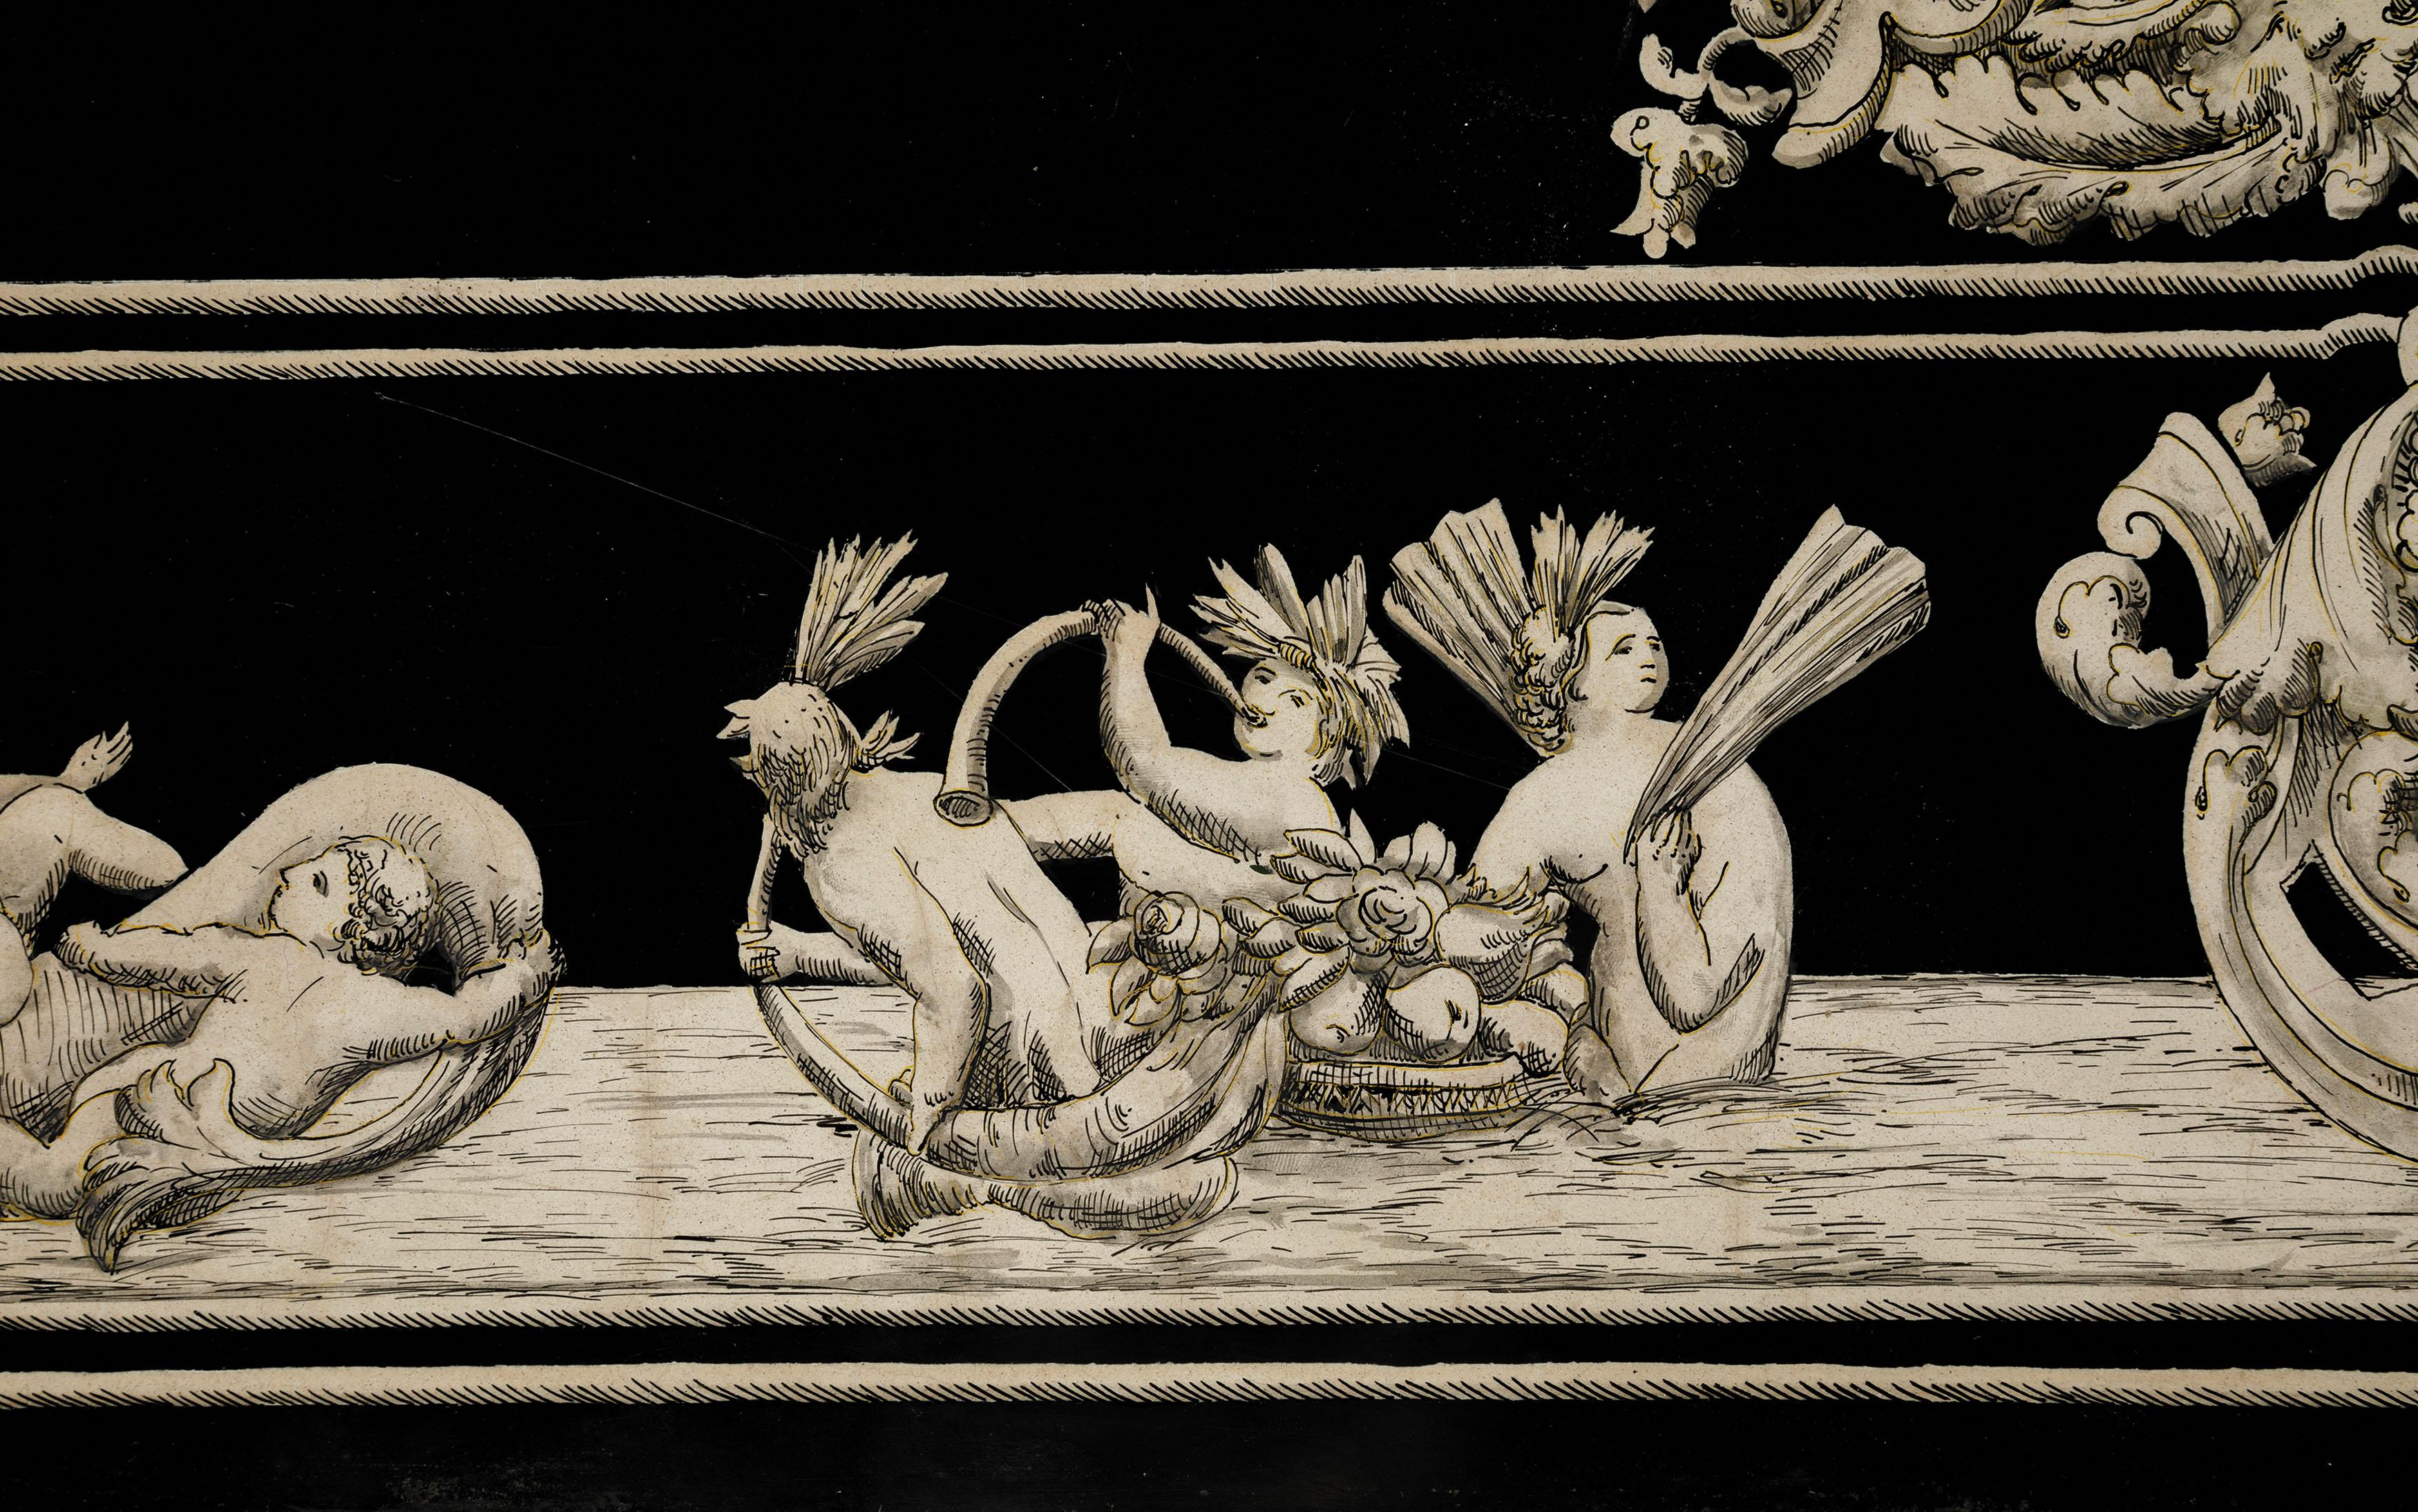 Fine Italian tabletop created using the scagliola technique depicting mythological scenes and floral motives